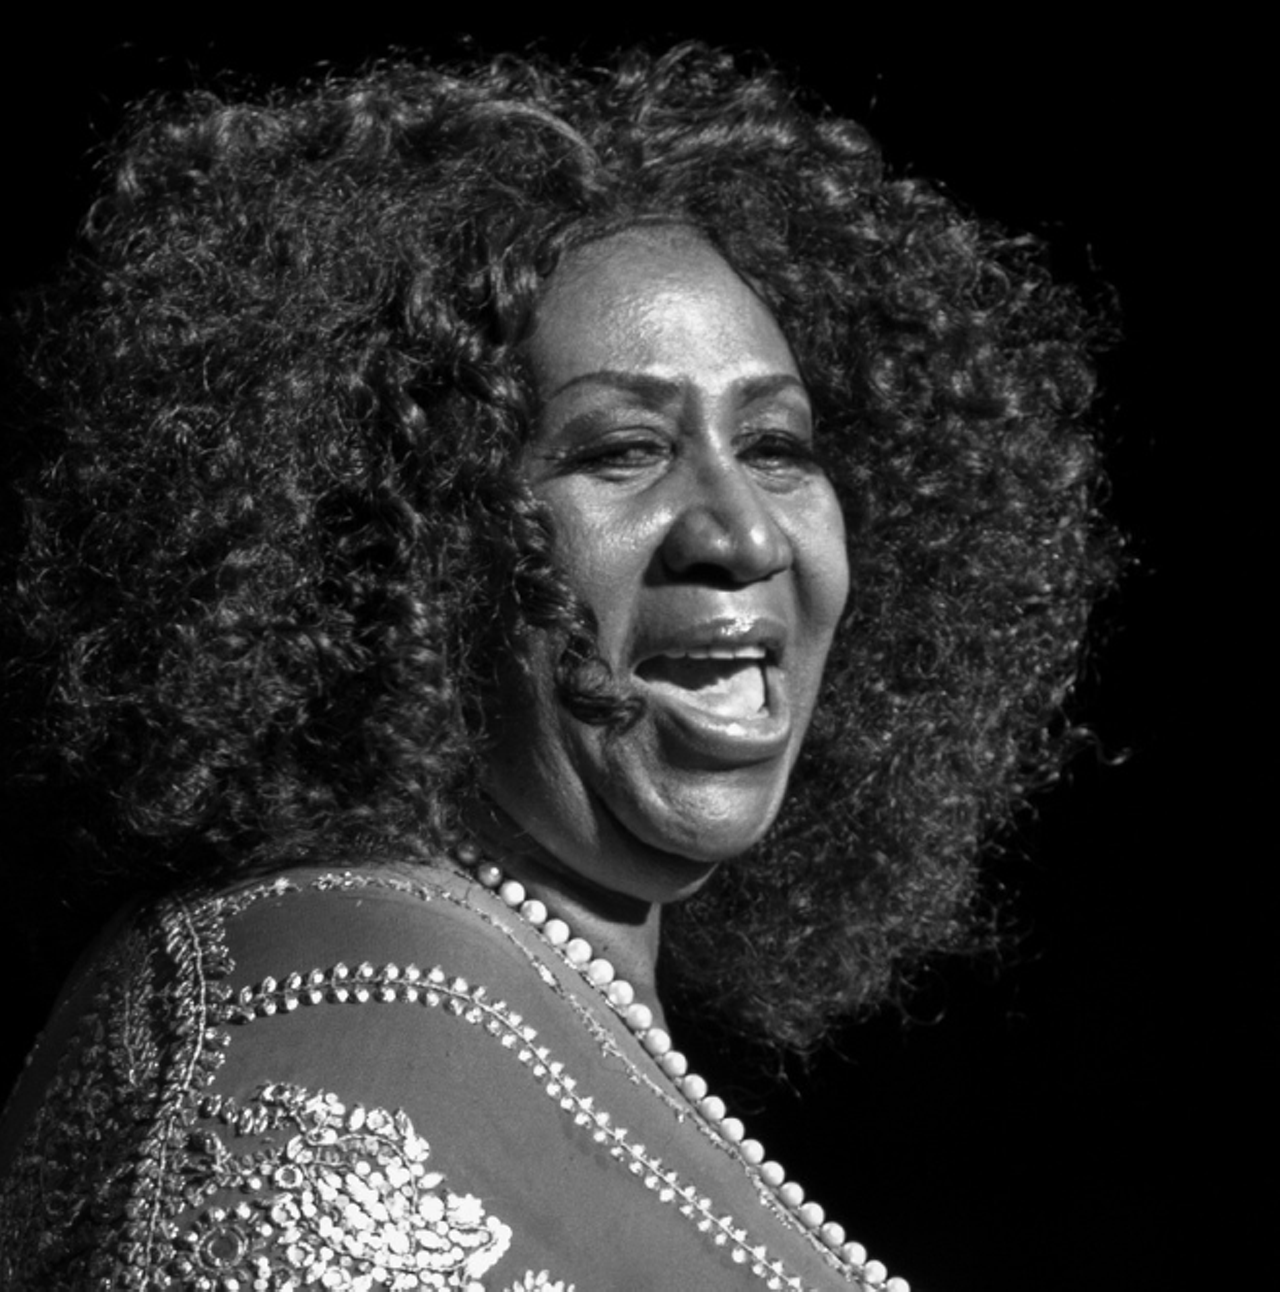 Aretha Franklin at the State Theatre